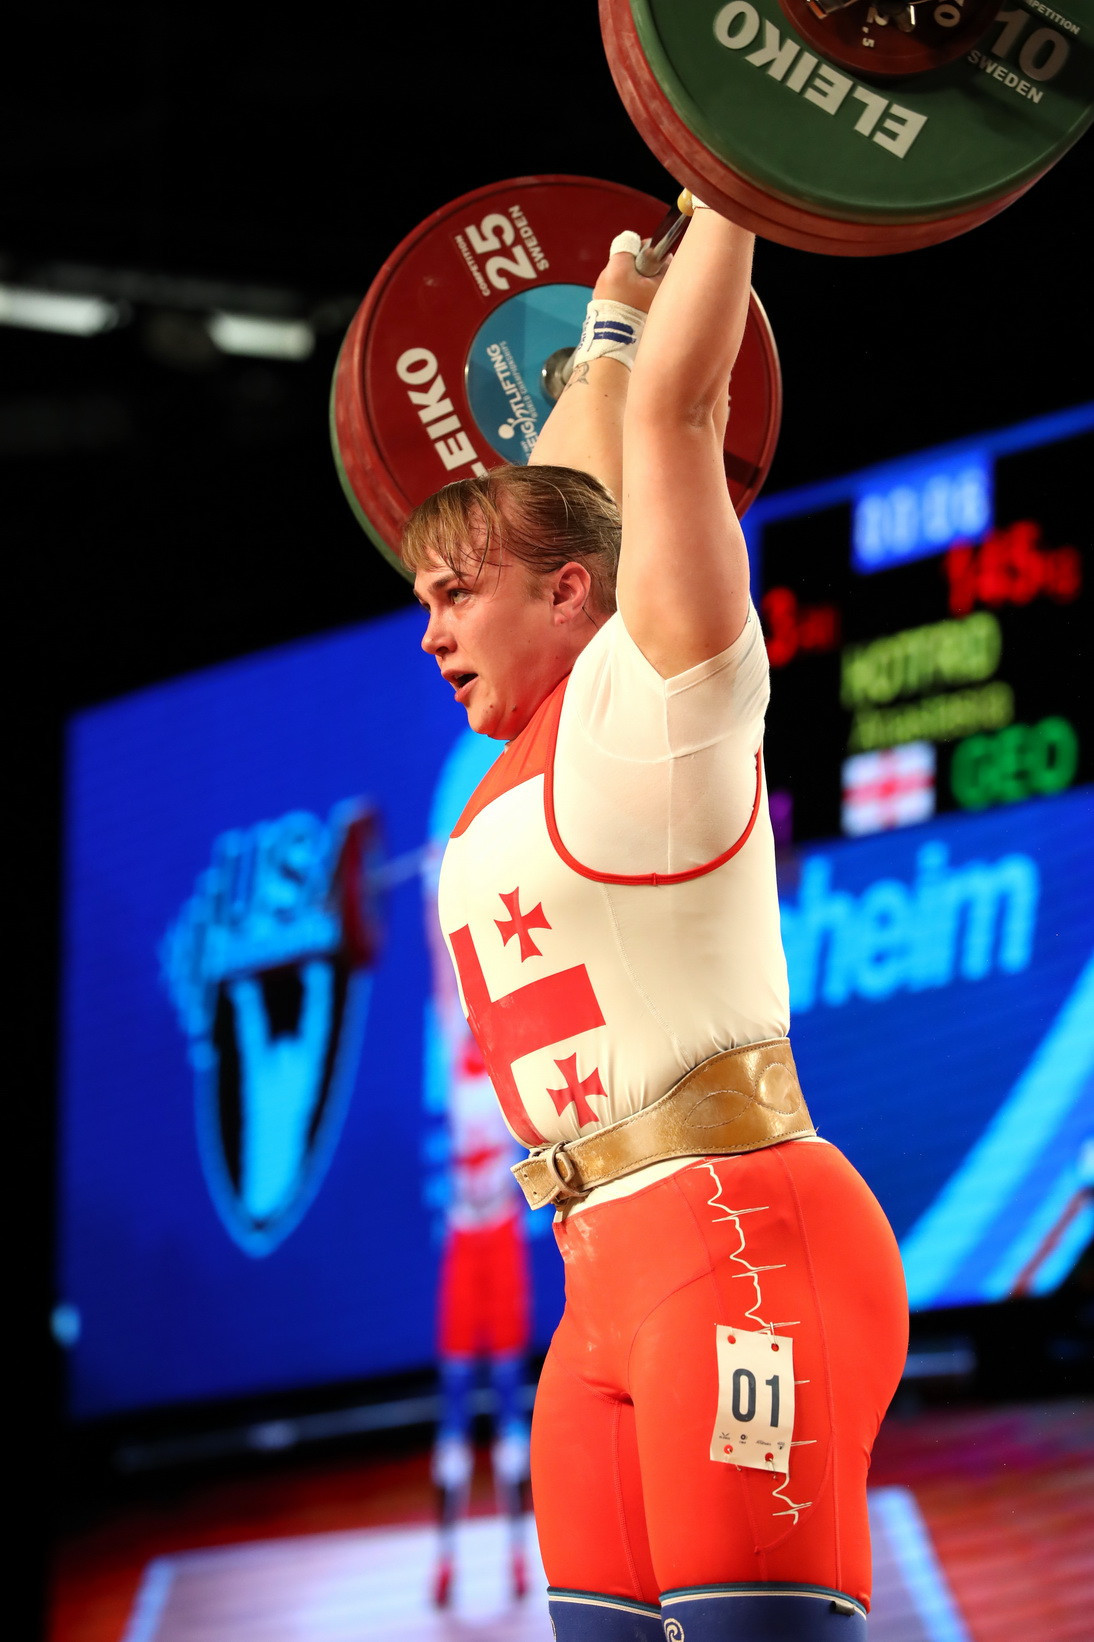 Hotfrid won the snatch with 120kg and came second in the clean and jerk with 145kg for a total of 265kg ©IWF